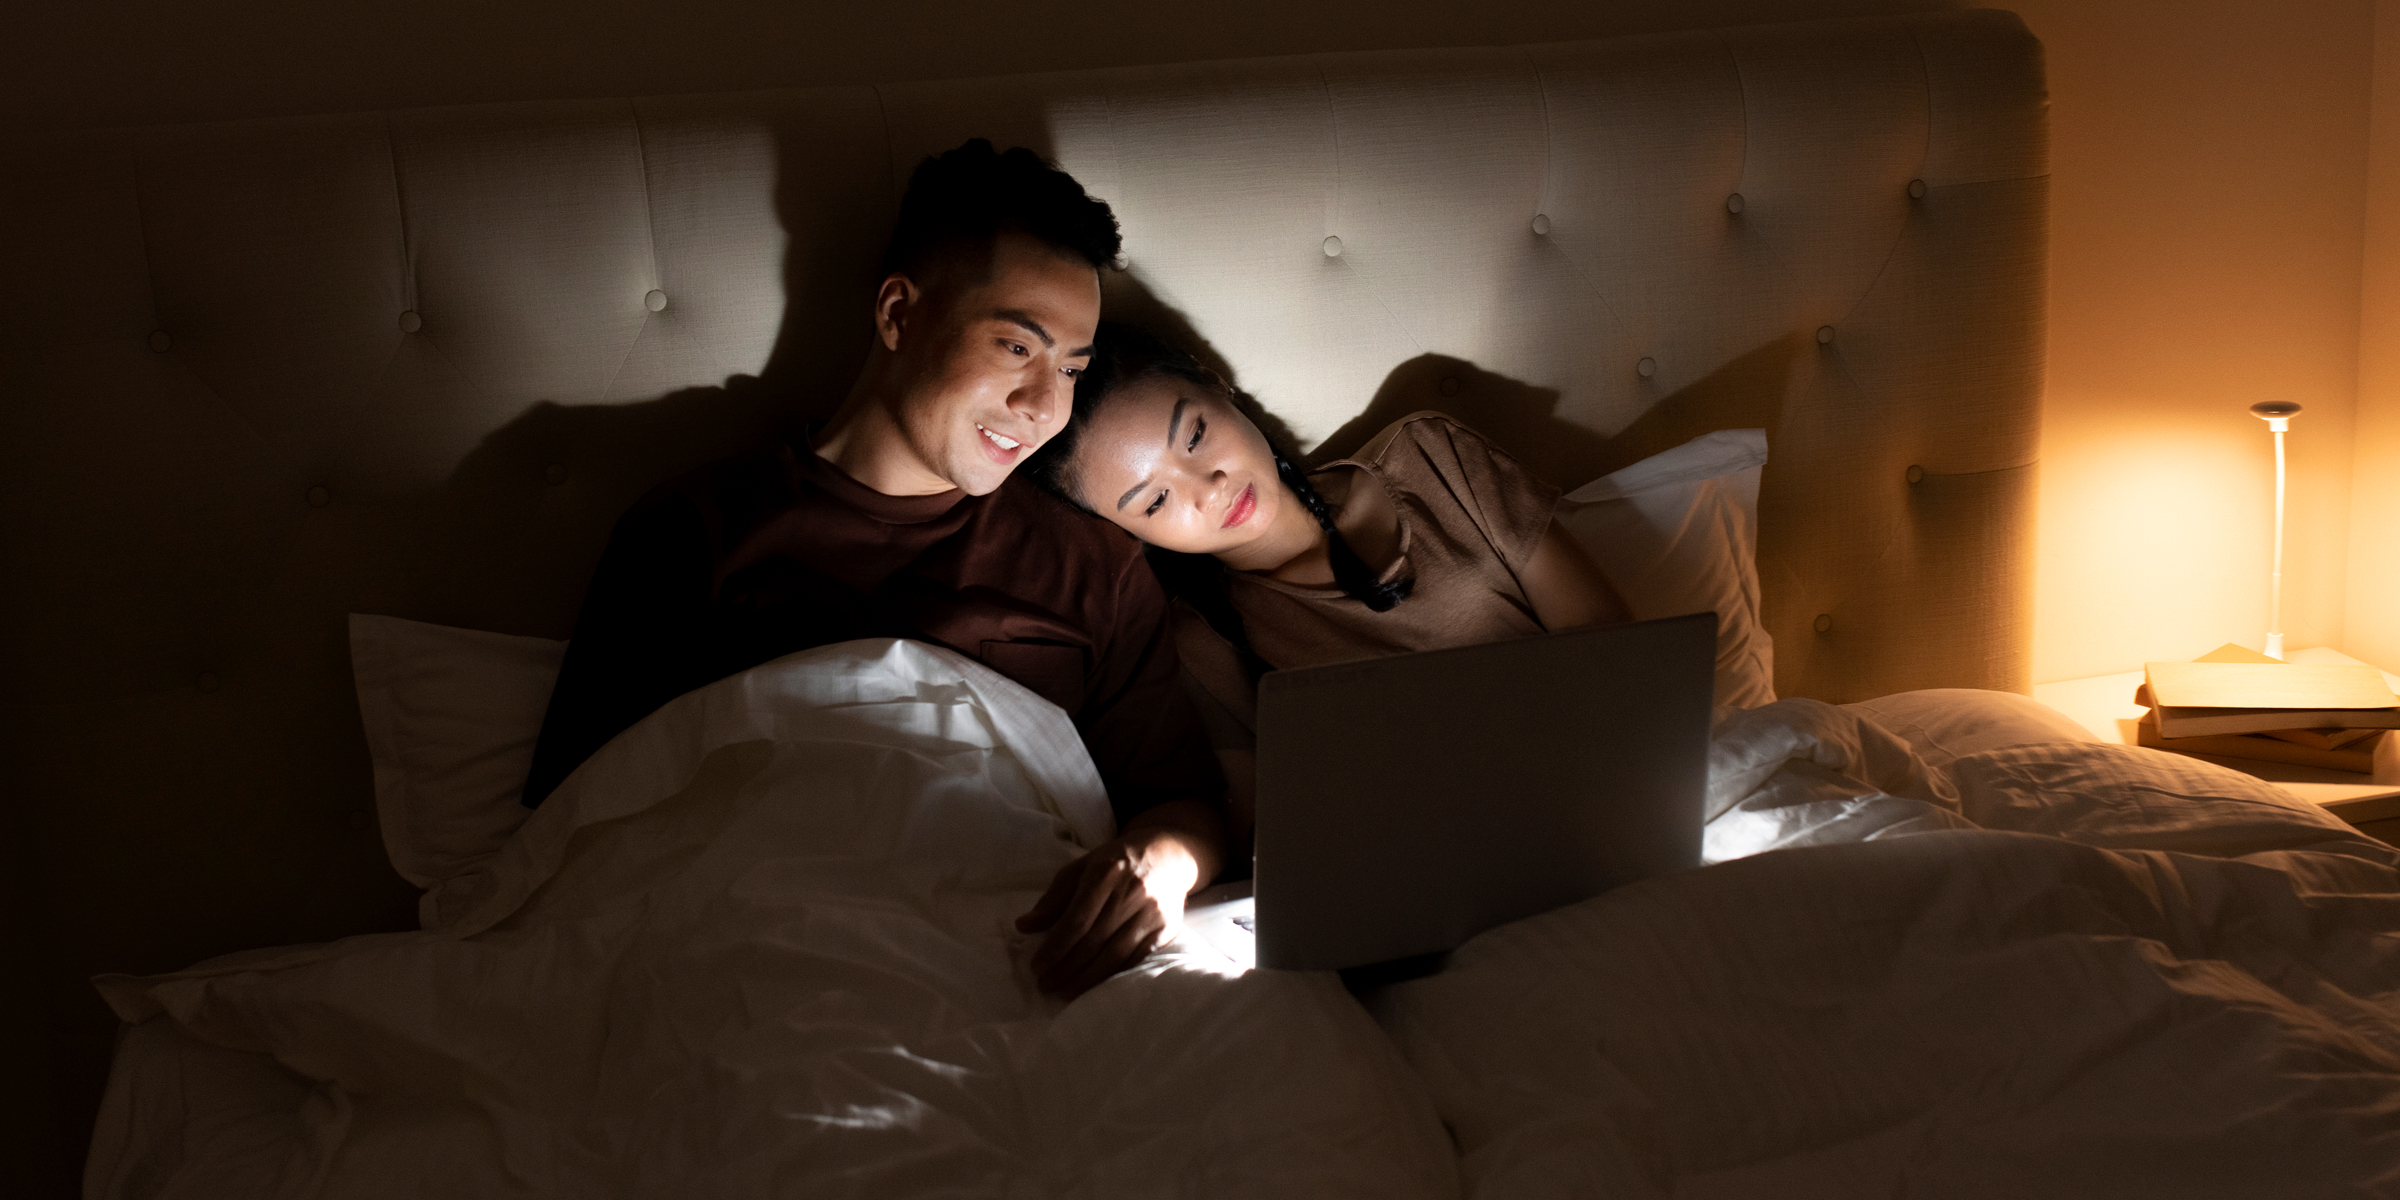 A man and woman lie in bed watching something on a laptop | Source: Freepik